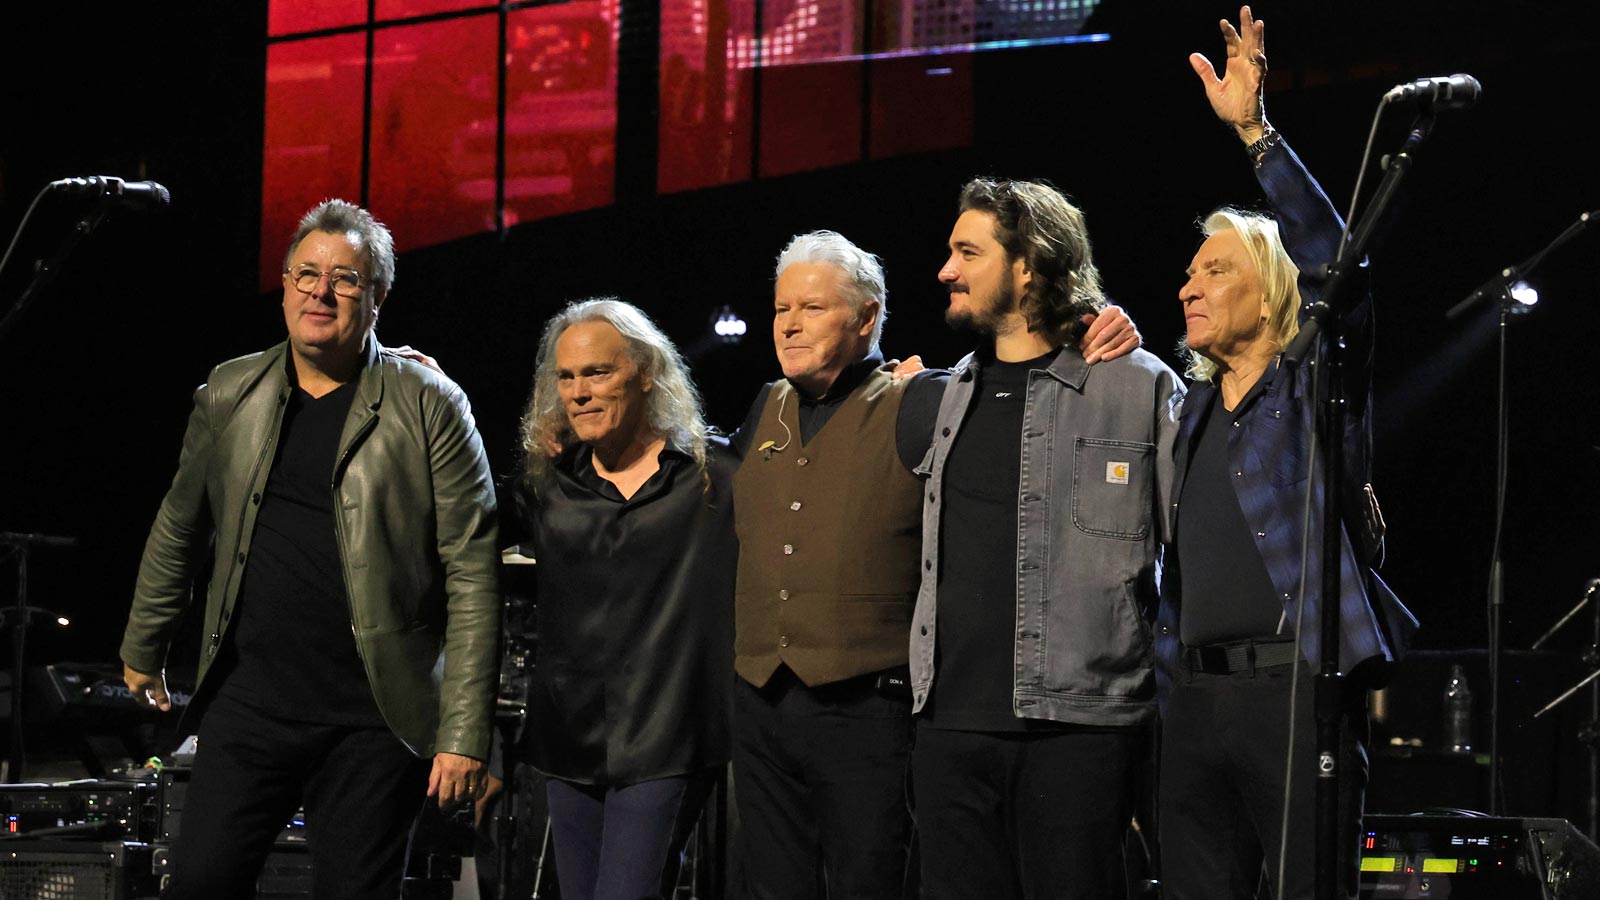 The Eagles are bringing their farewell tour to Footprint Center in Phoenix for two shows Jan. 19-20...